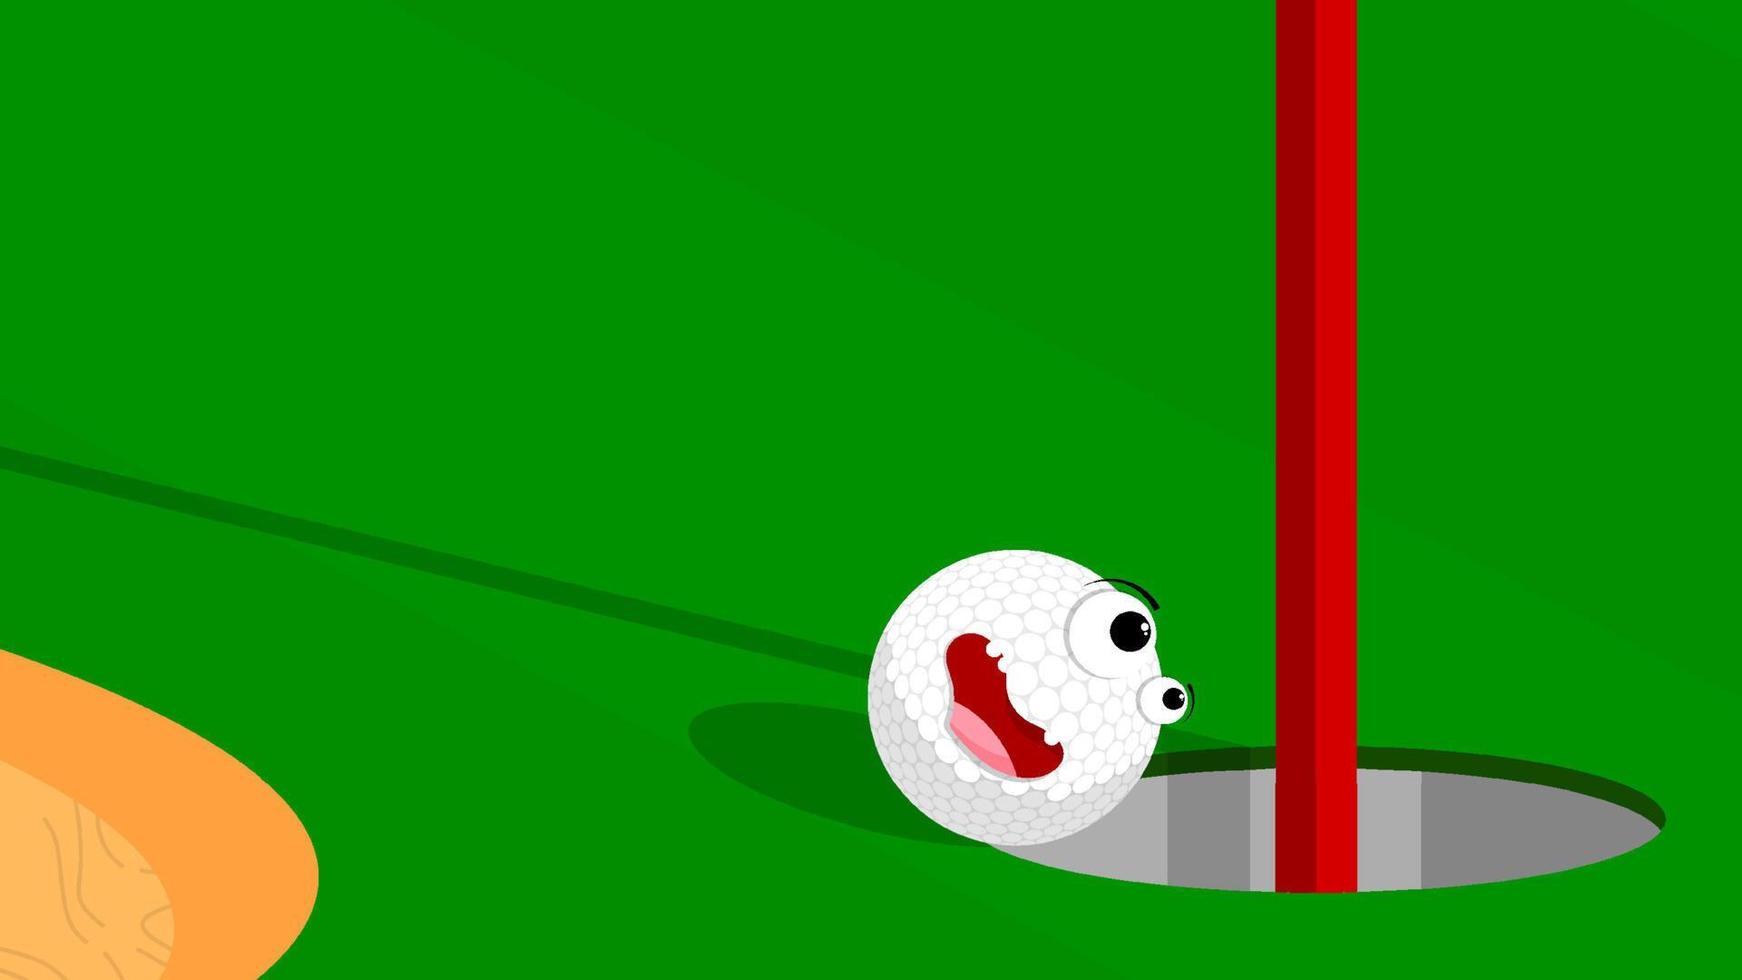 cheerful funny sports golf ball rolling in hole on green field. Golf hole on course marked with flag. Active lifestyle. Cartoon vector